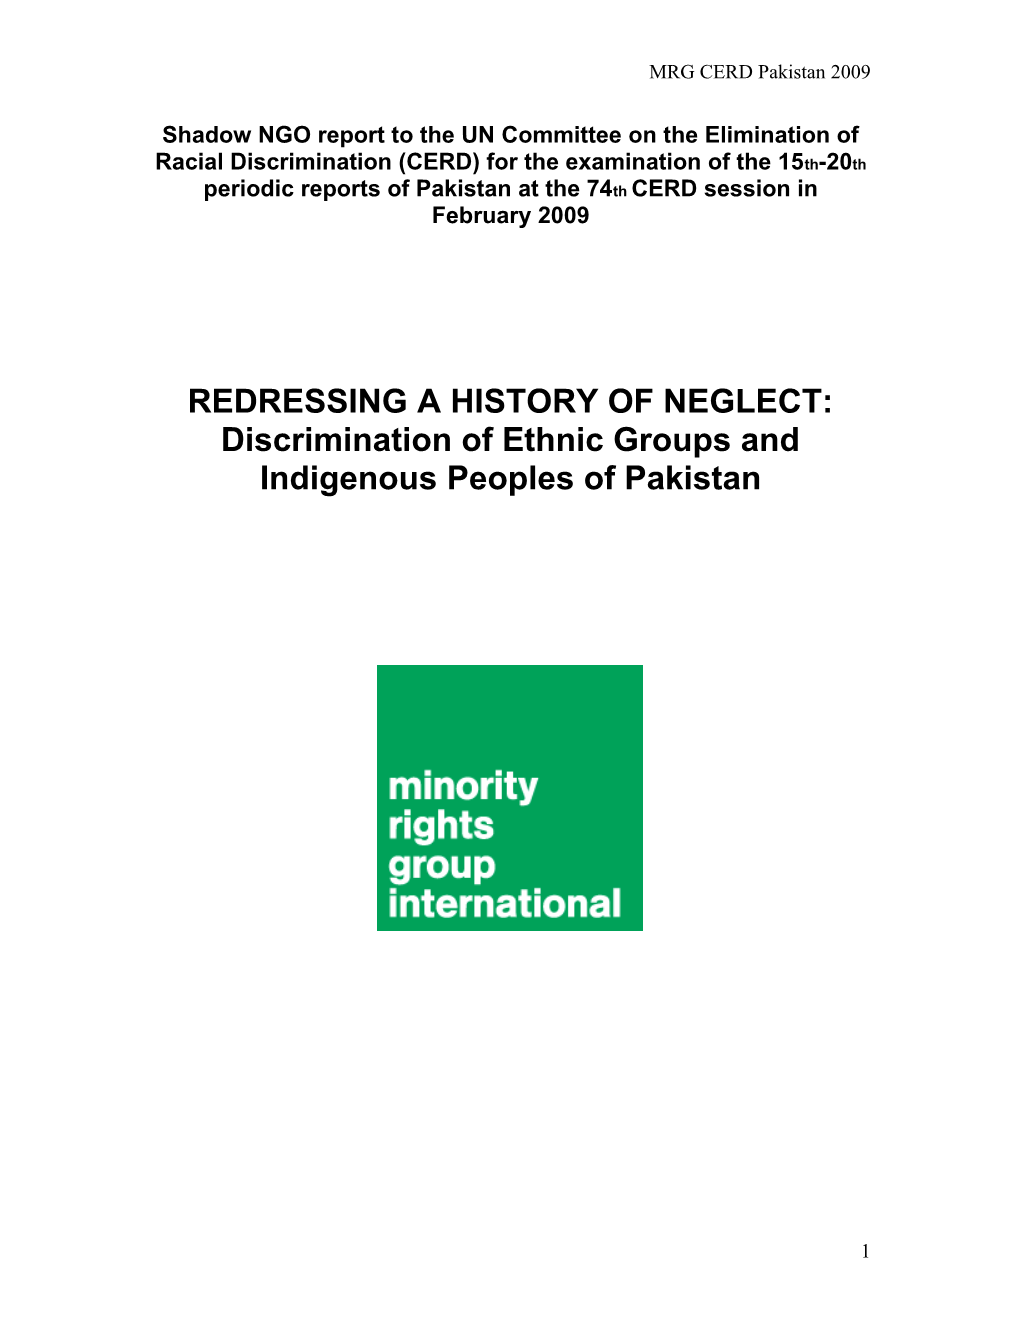 Cover Page Include the Name of the Country the Report Addresses